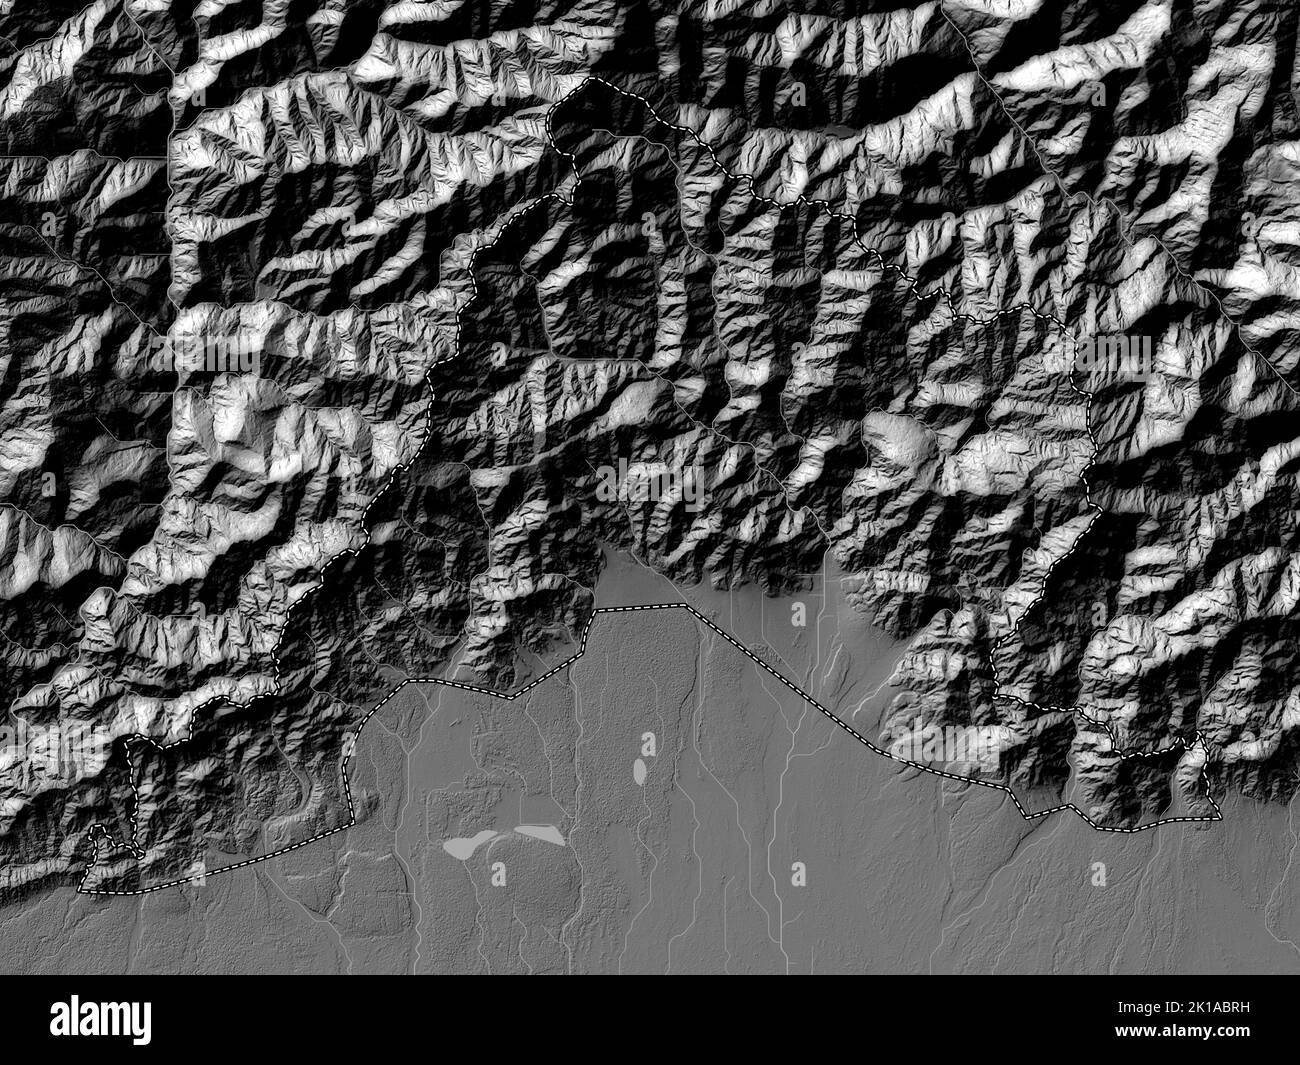 Sarpang, district of Bhutan. Bilevel elevation map with lakes and rivers Stock Photo